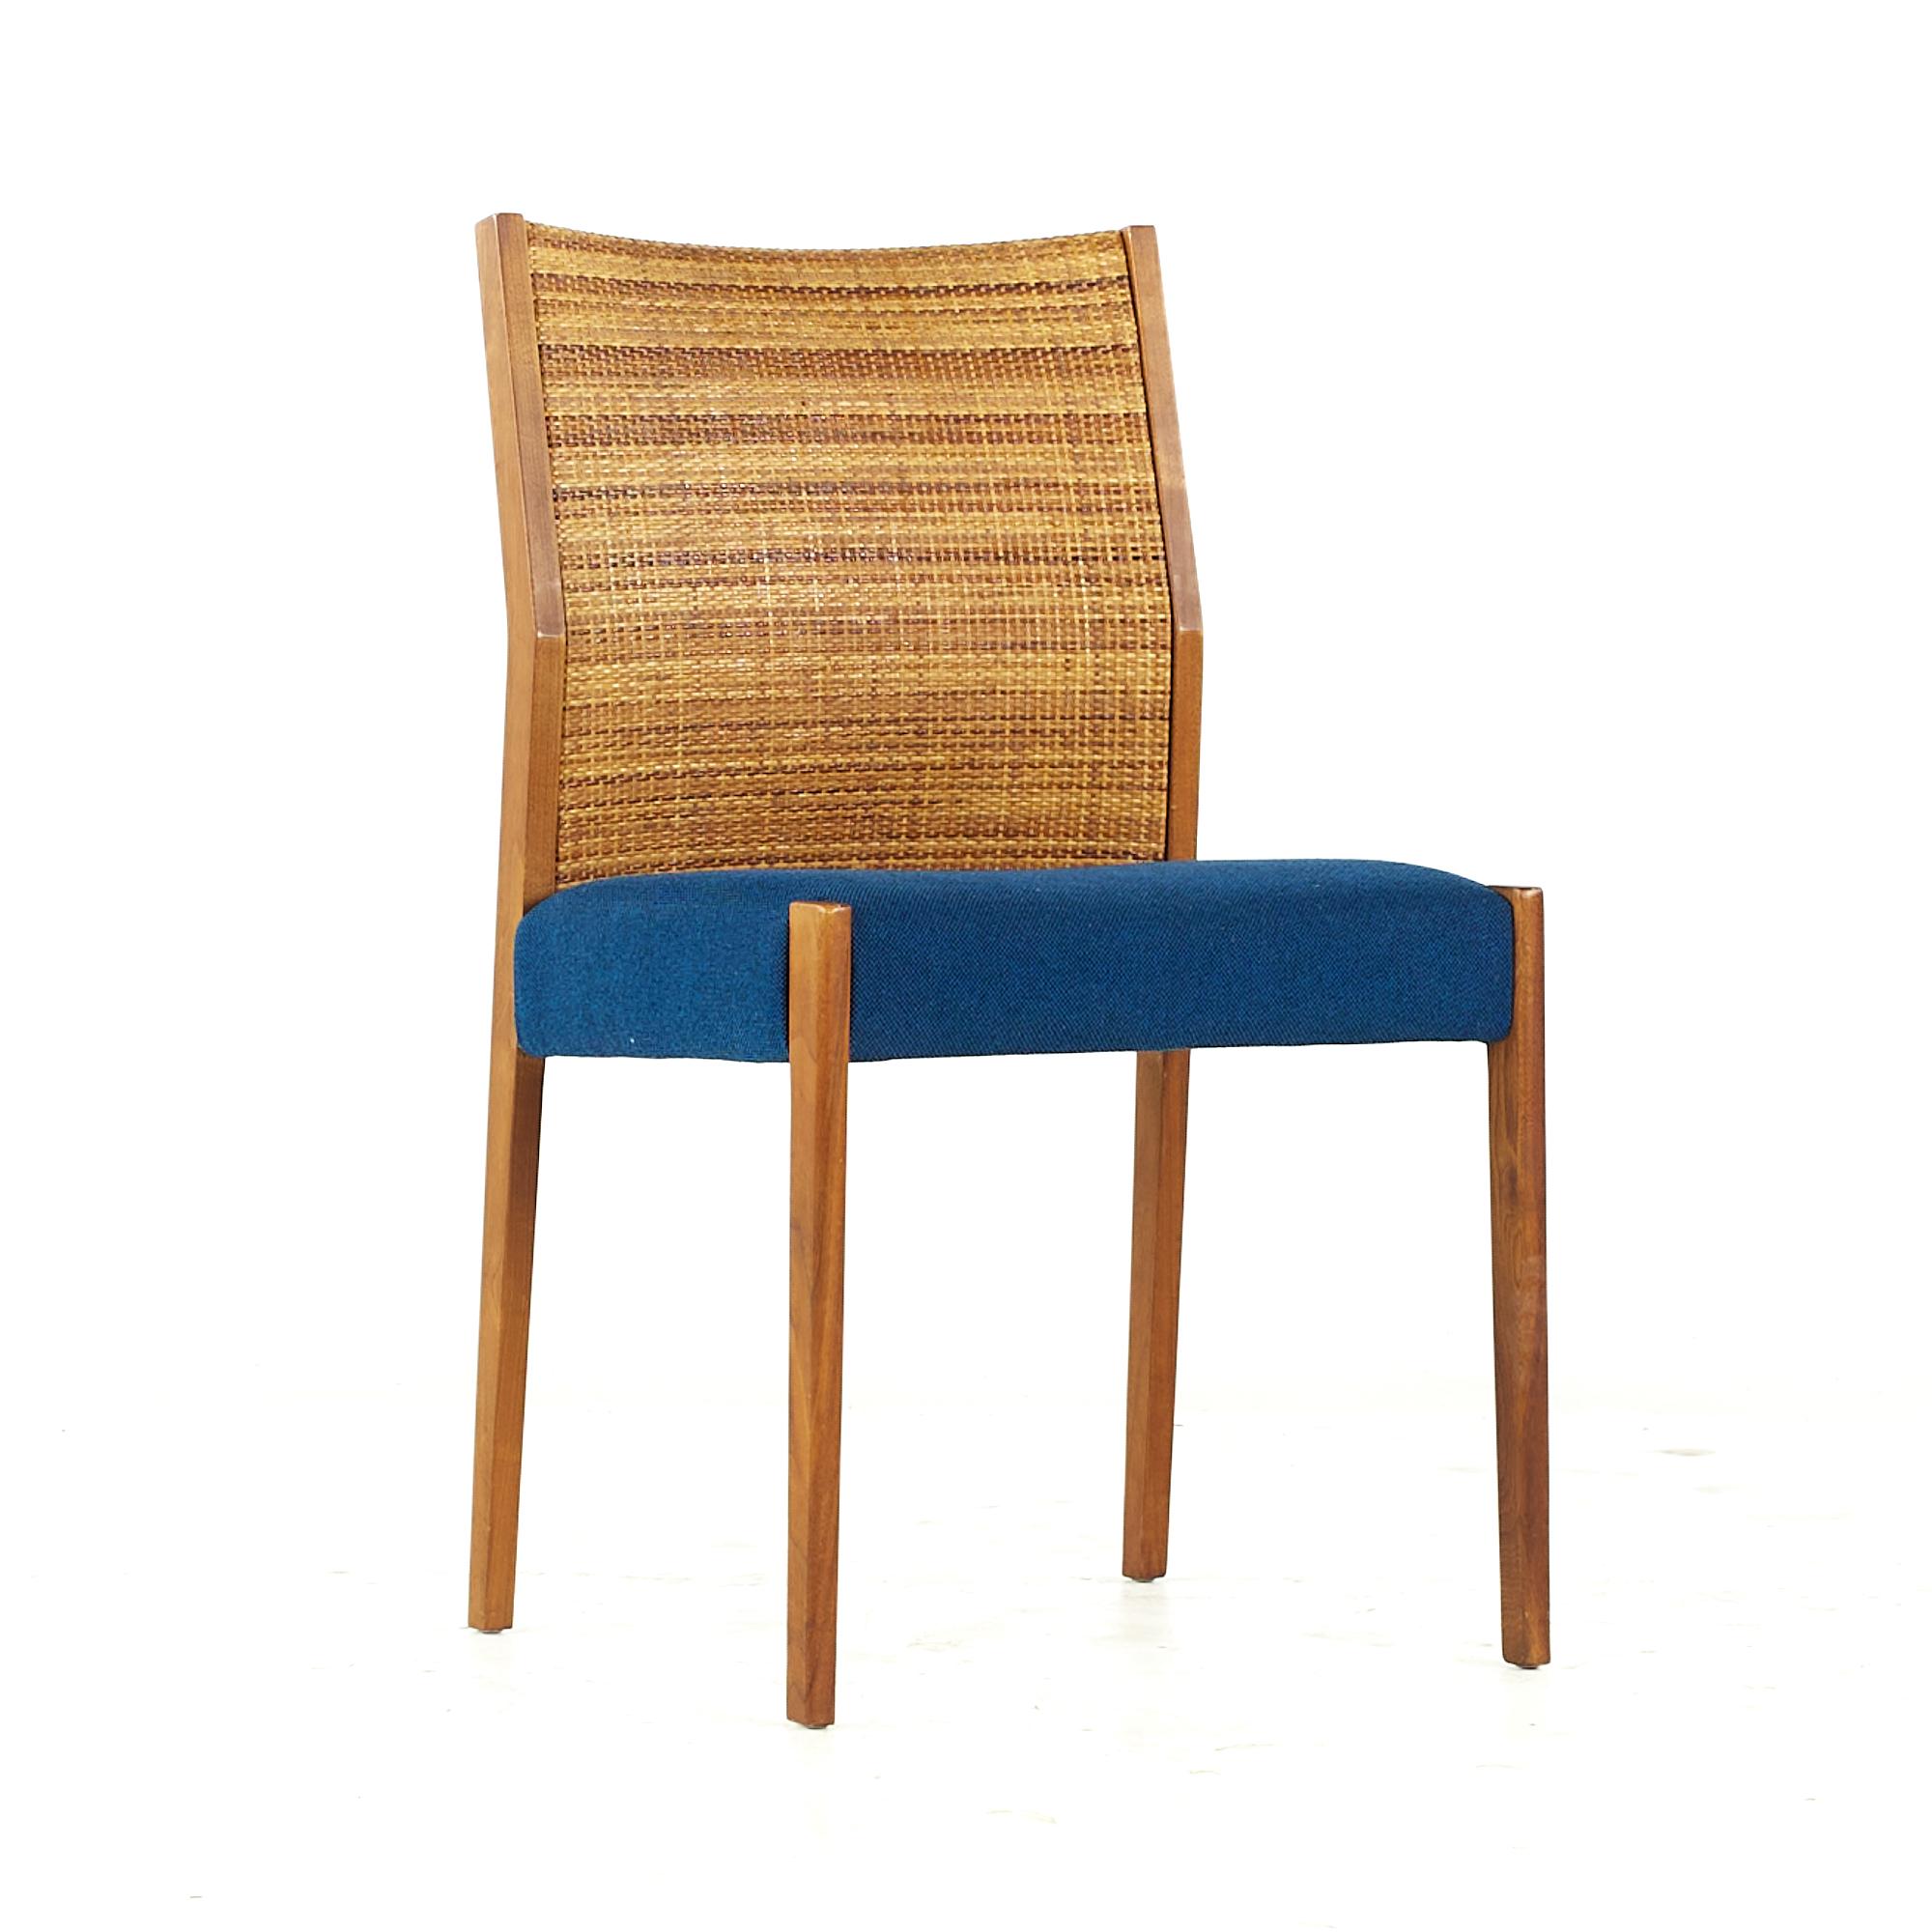 American Jens Risom Midcentury Cane and Walnut Dining Chairs, Set of 6 For Sale